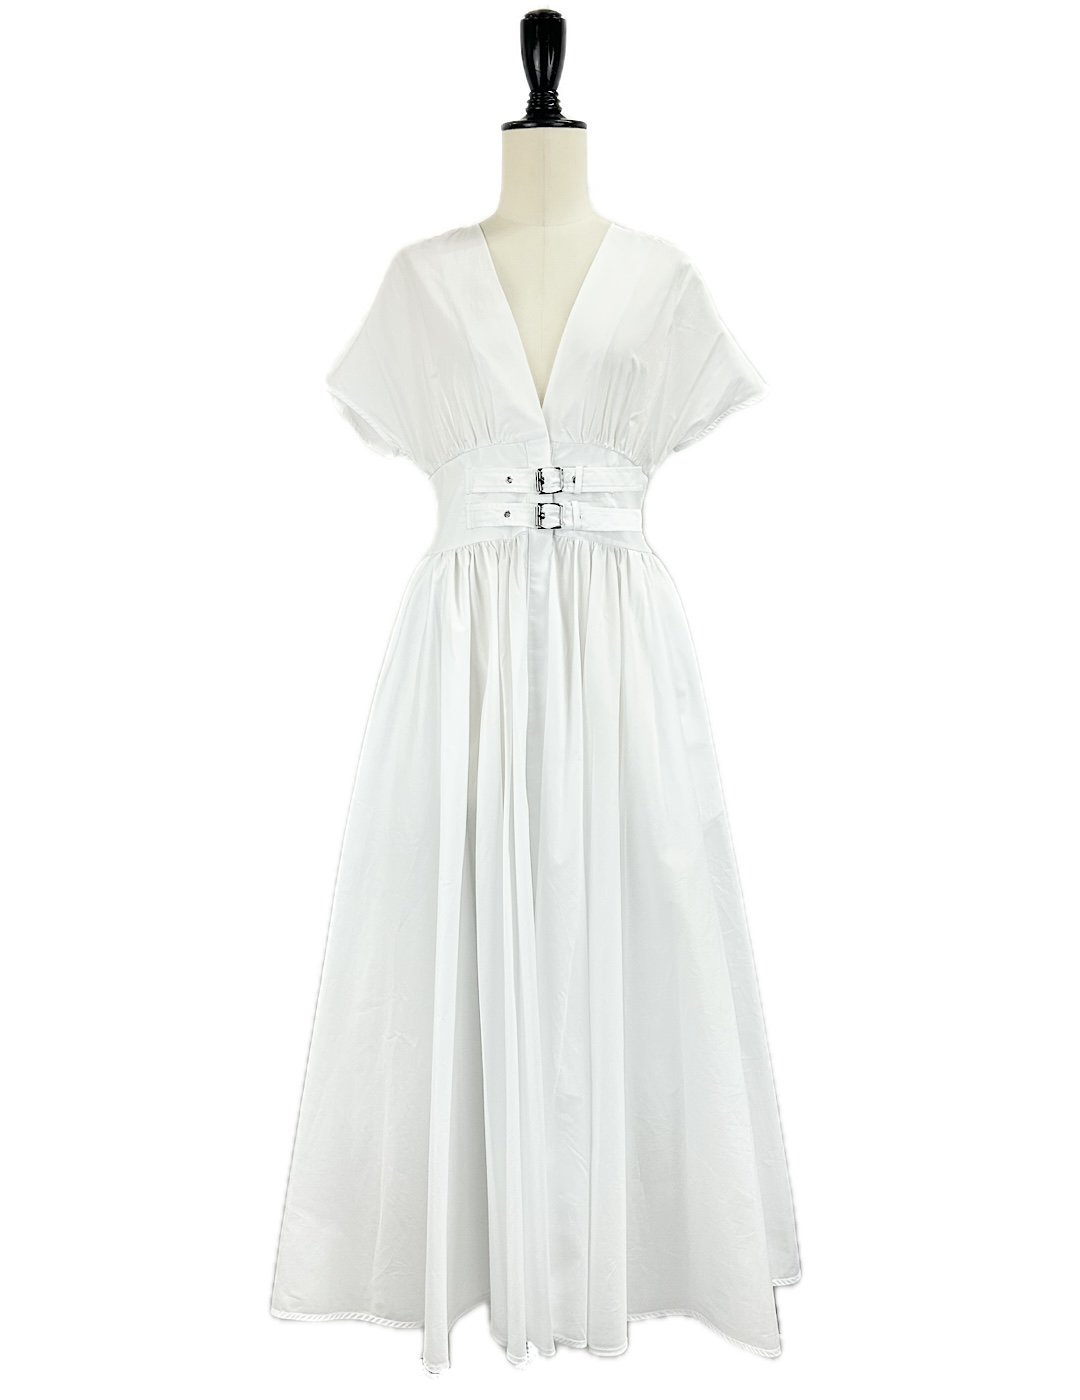 <img class='new_mark_img1' src='https://img.shop-pro.jp/img/new/icons6.gif' style='border:none;display:inline;margin:0px;padding:0px;width:auto;' />MEIMEIJ /  COTTON LONG DRESS